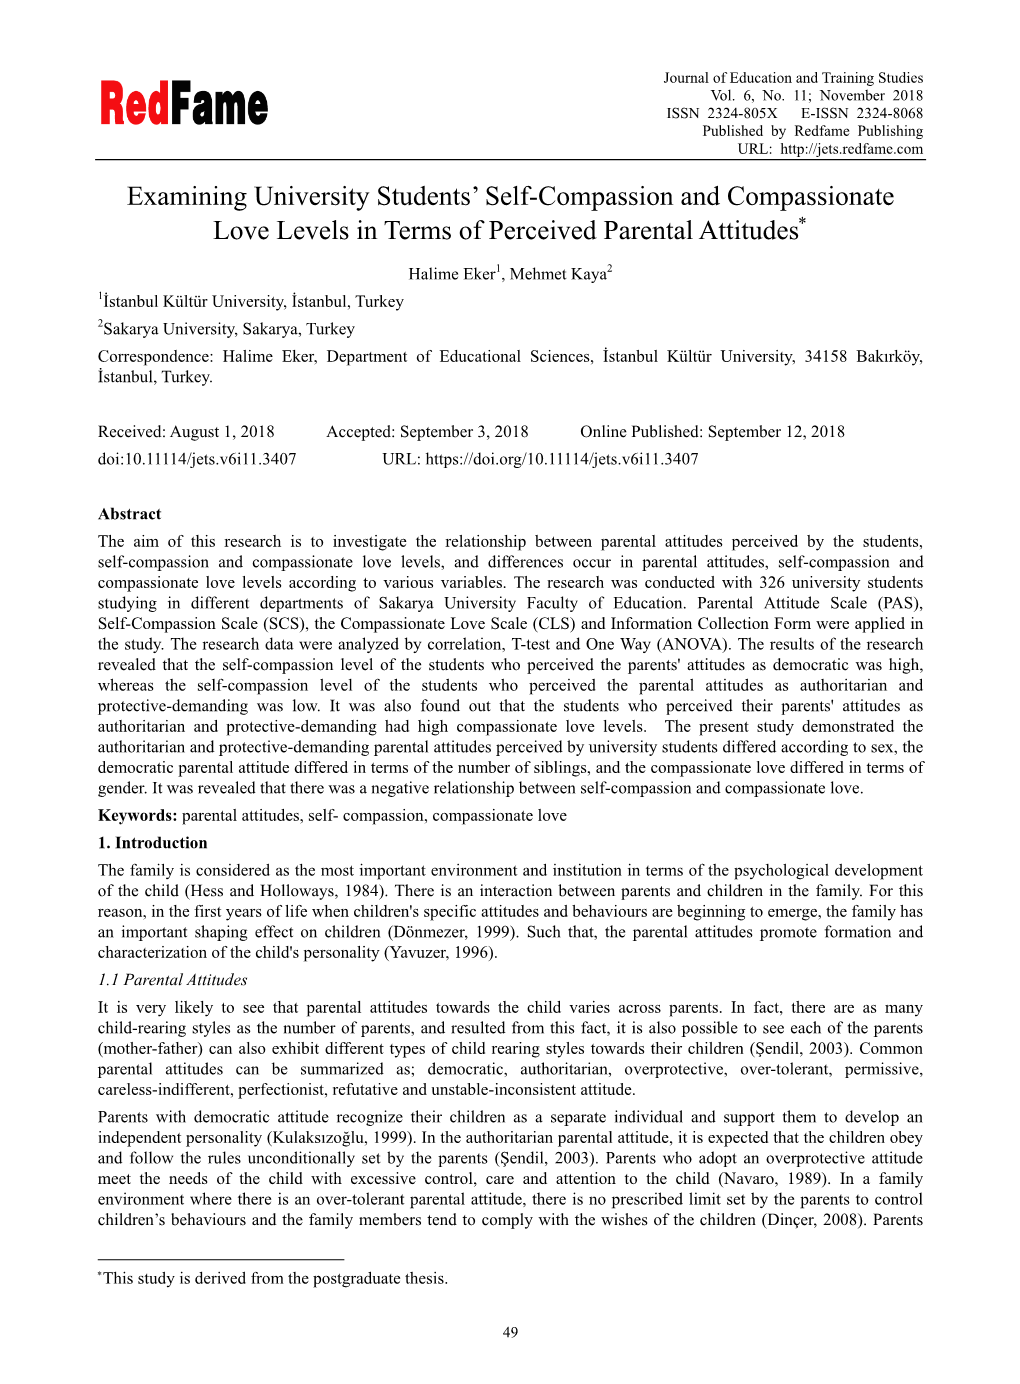 Examining University Students' Self-Compassion and Compassionate Love Levels in Terms of Perceived Parental Attitudes